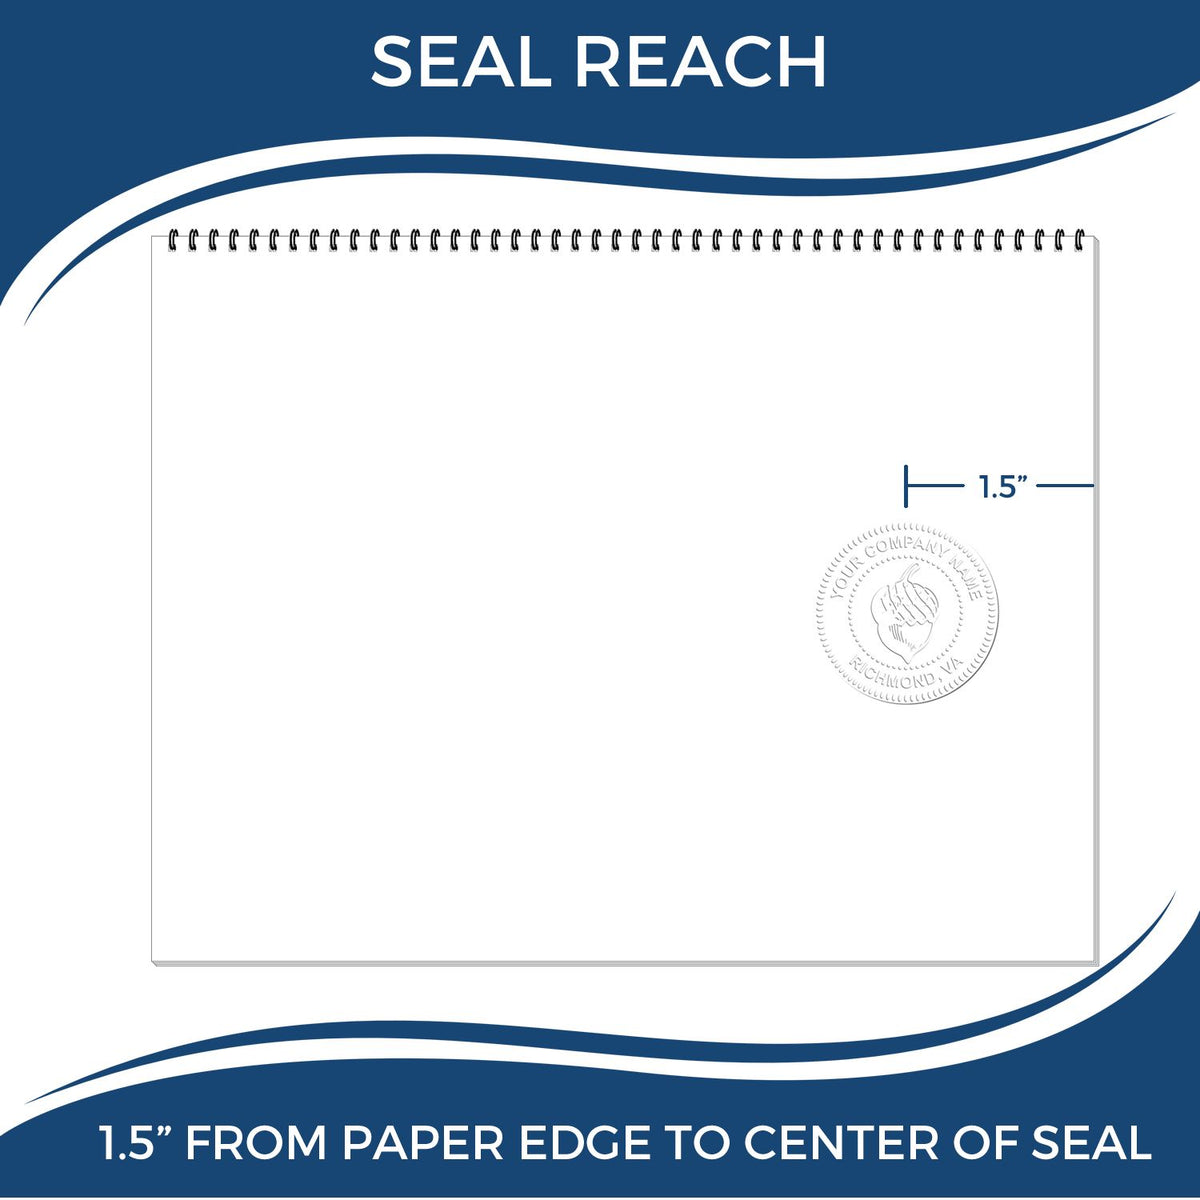 An infographic showing the seal reach which is represented by a ruler and a miniature seal image of the State of Rhode Island Soft Land Surveyor Embossing Seal